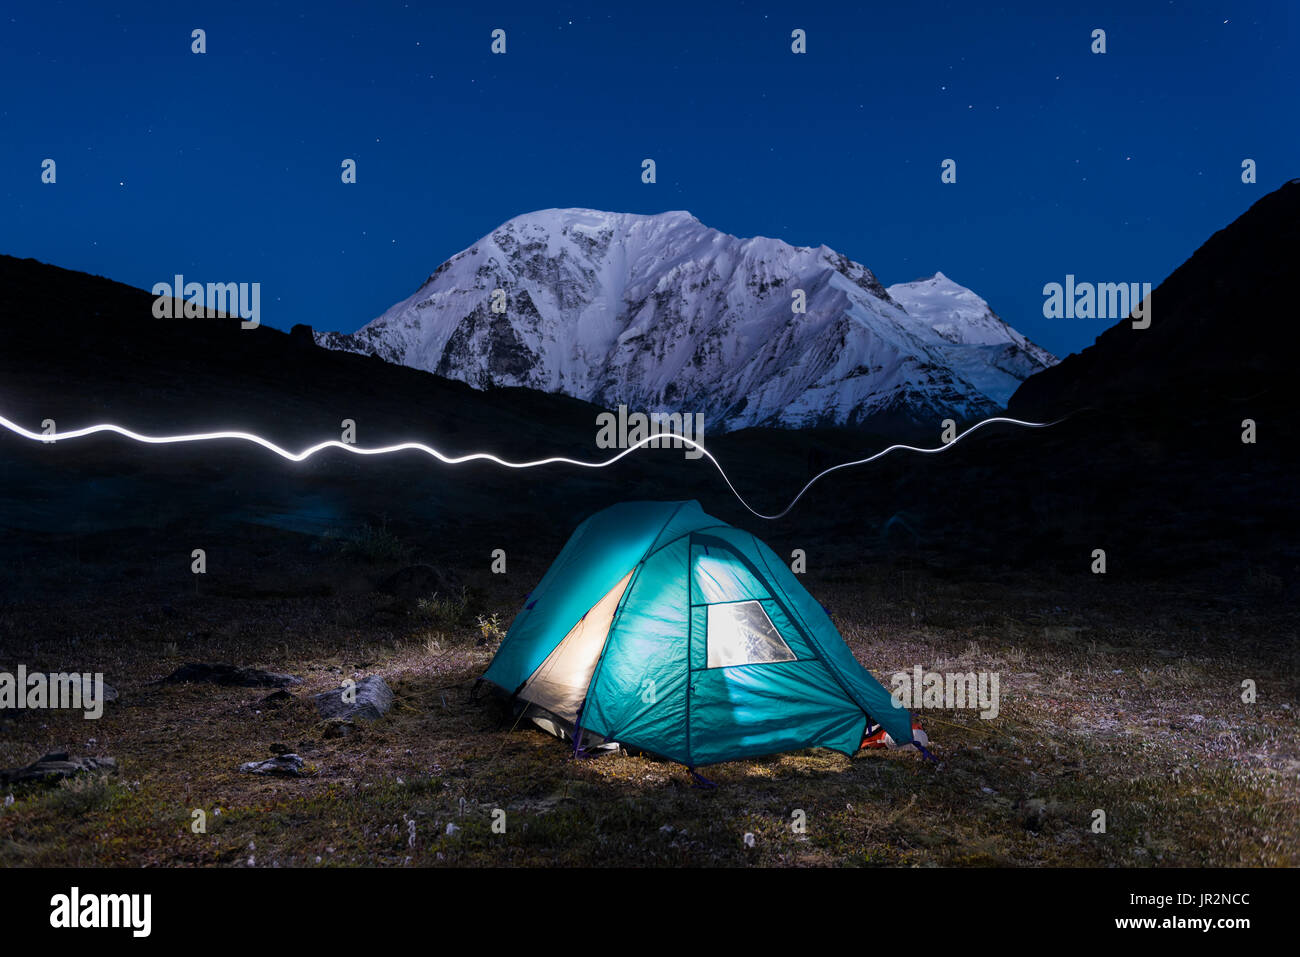 Nighttime View Of Mt. Moffit With A Lit Tent And Headlamp Trail In The Foreground, Alaska Range, Interior Alaska, USA Stock Photo